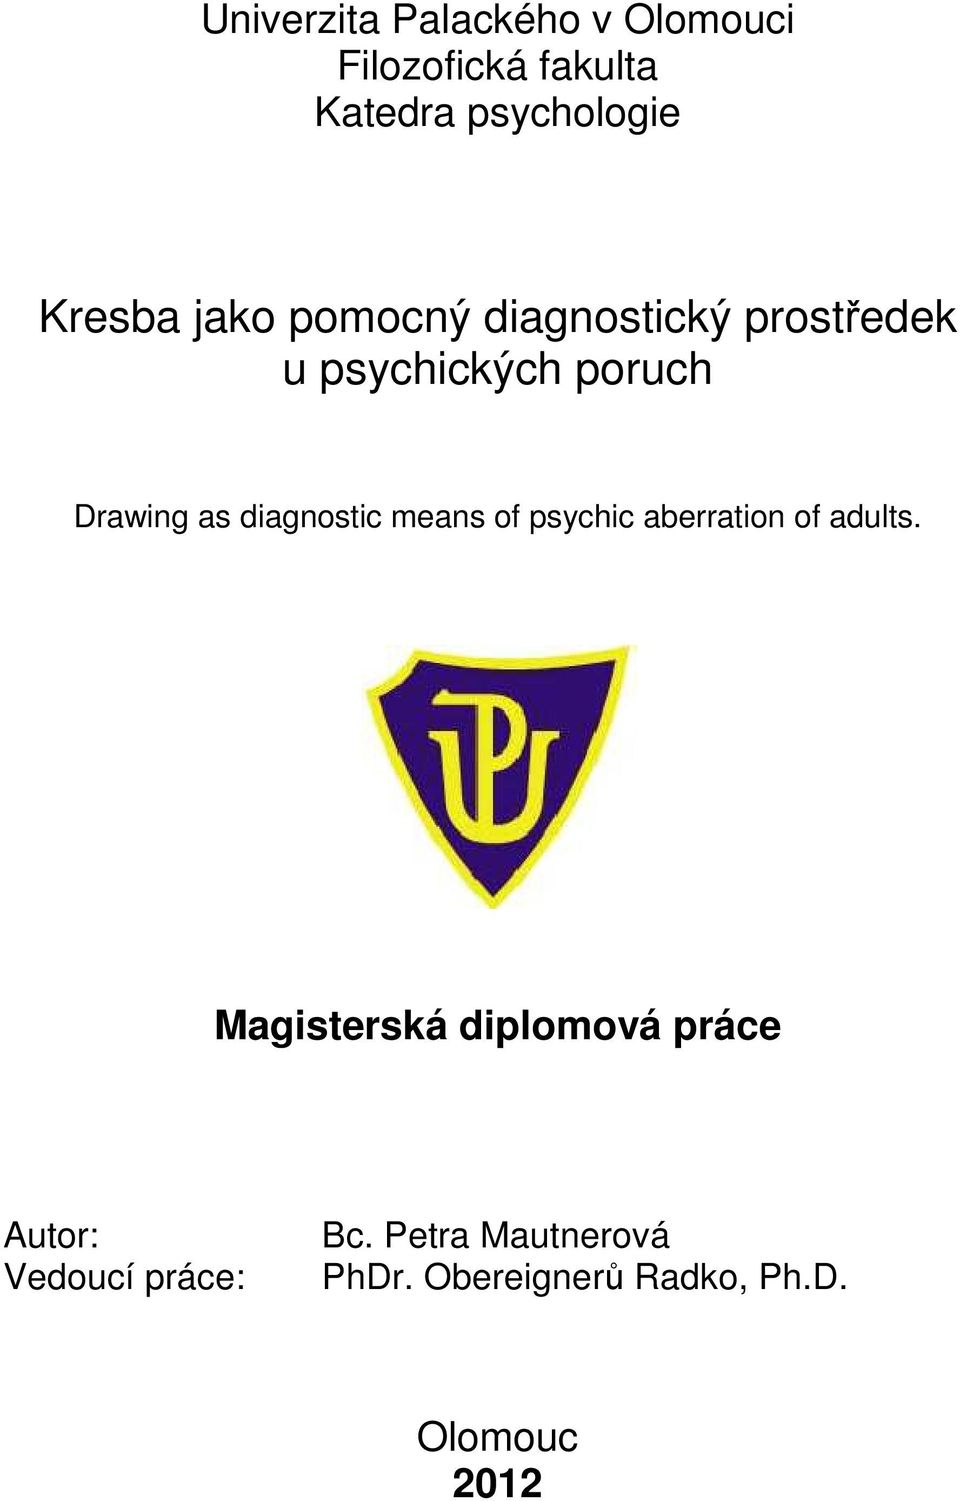 diagnostic means of psychic aberration of adults.